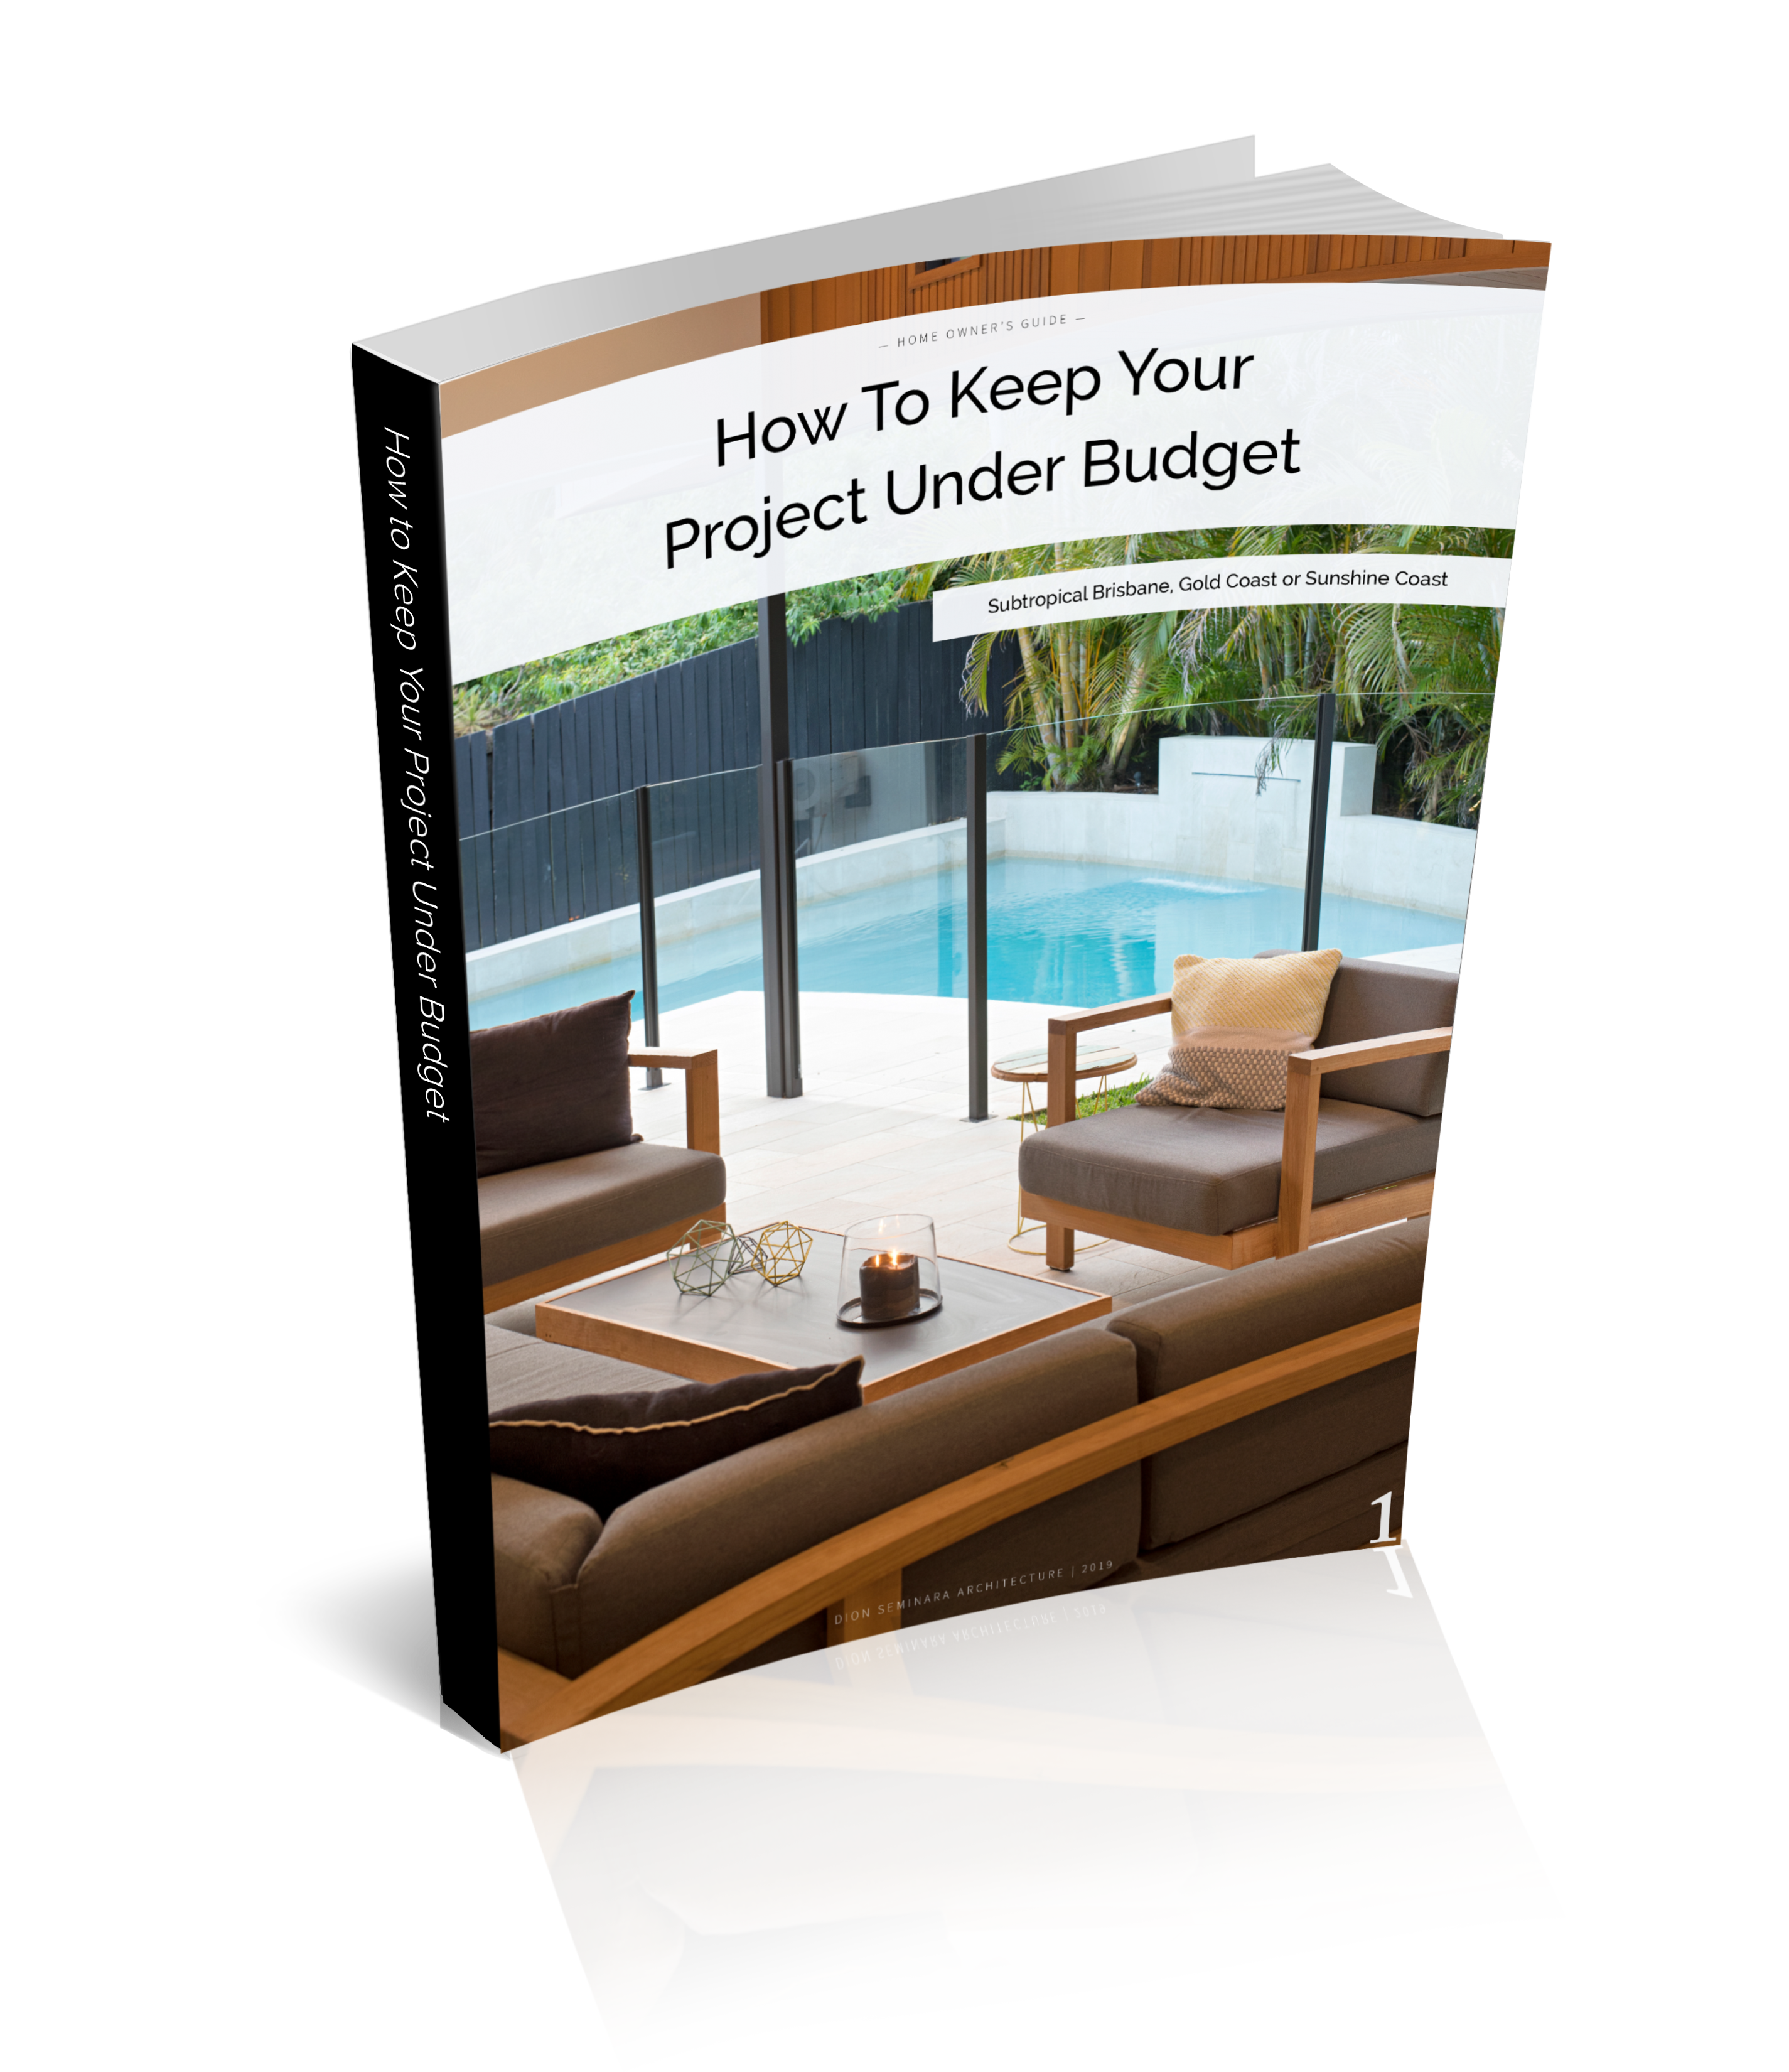 How To Keep Your Building Project Under Budget